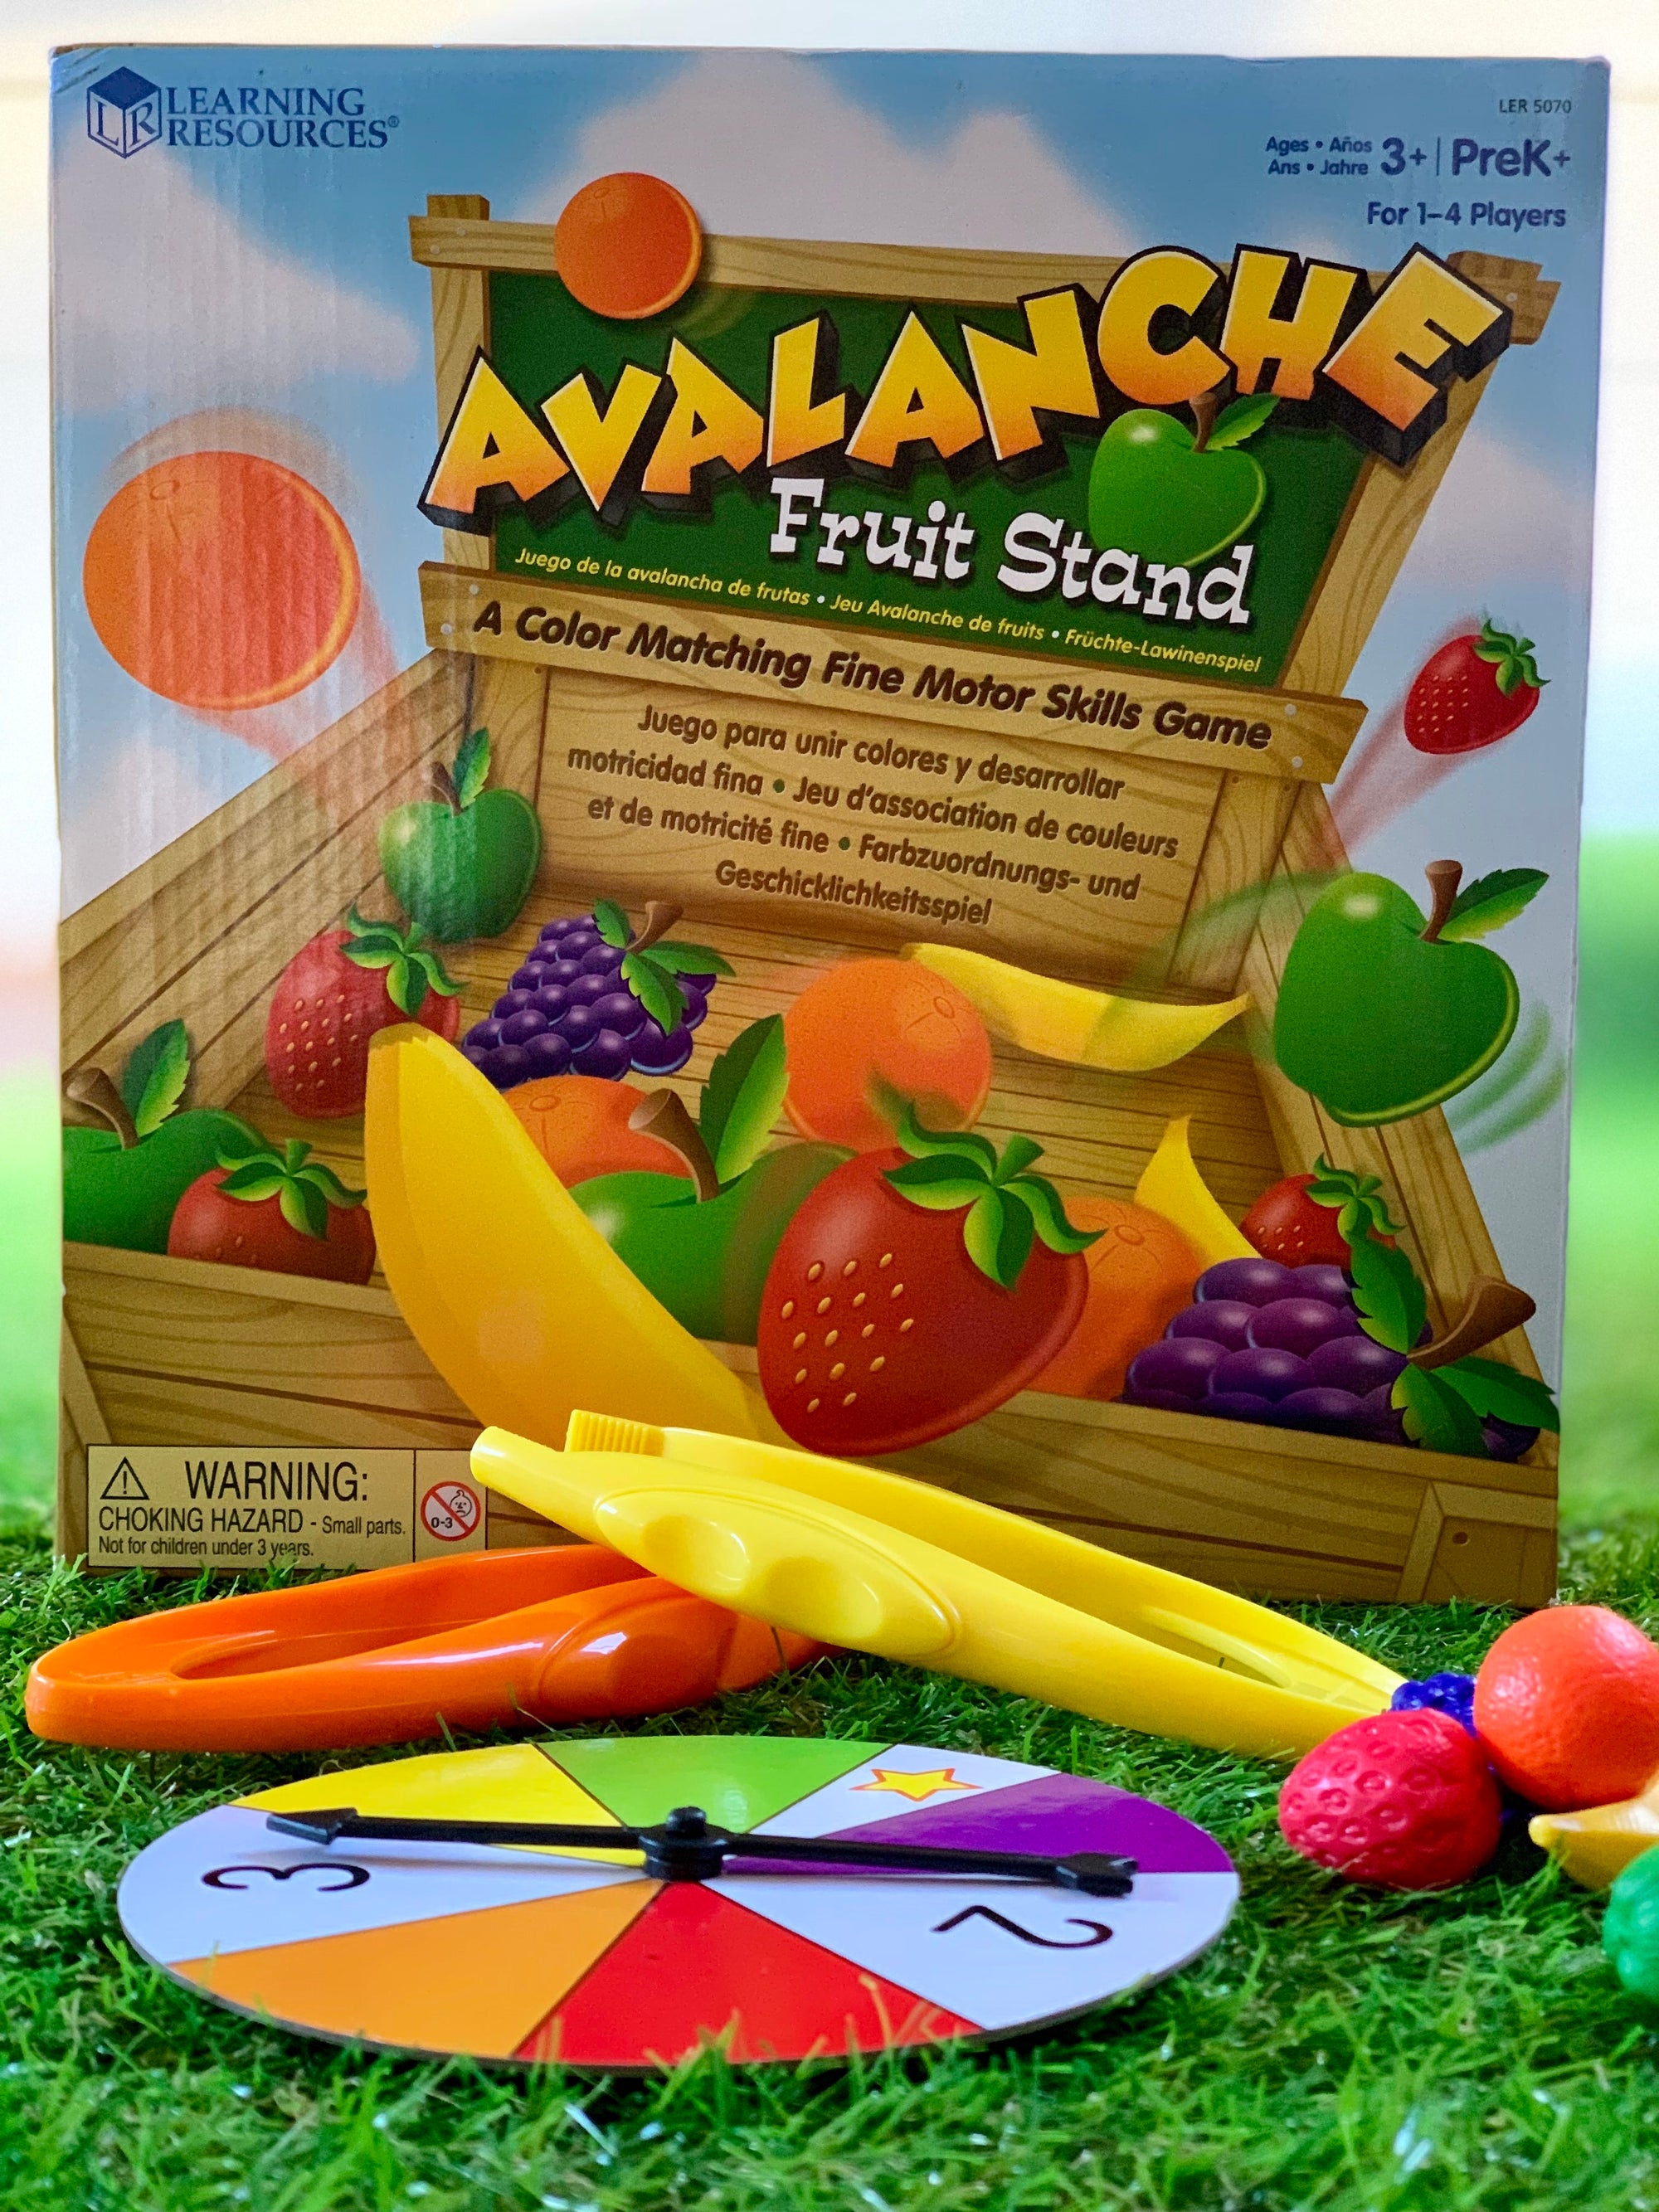 Avalanche Fruit Stand Game packaging box along with spinner and fruit laid out on grass